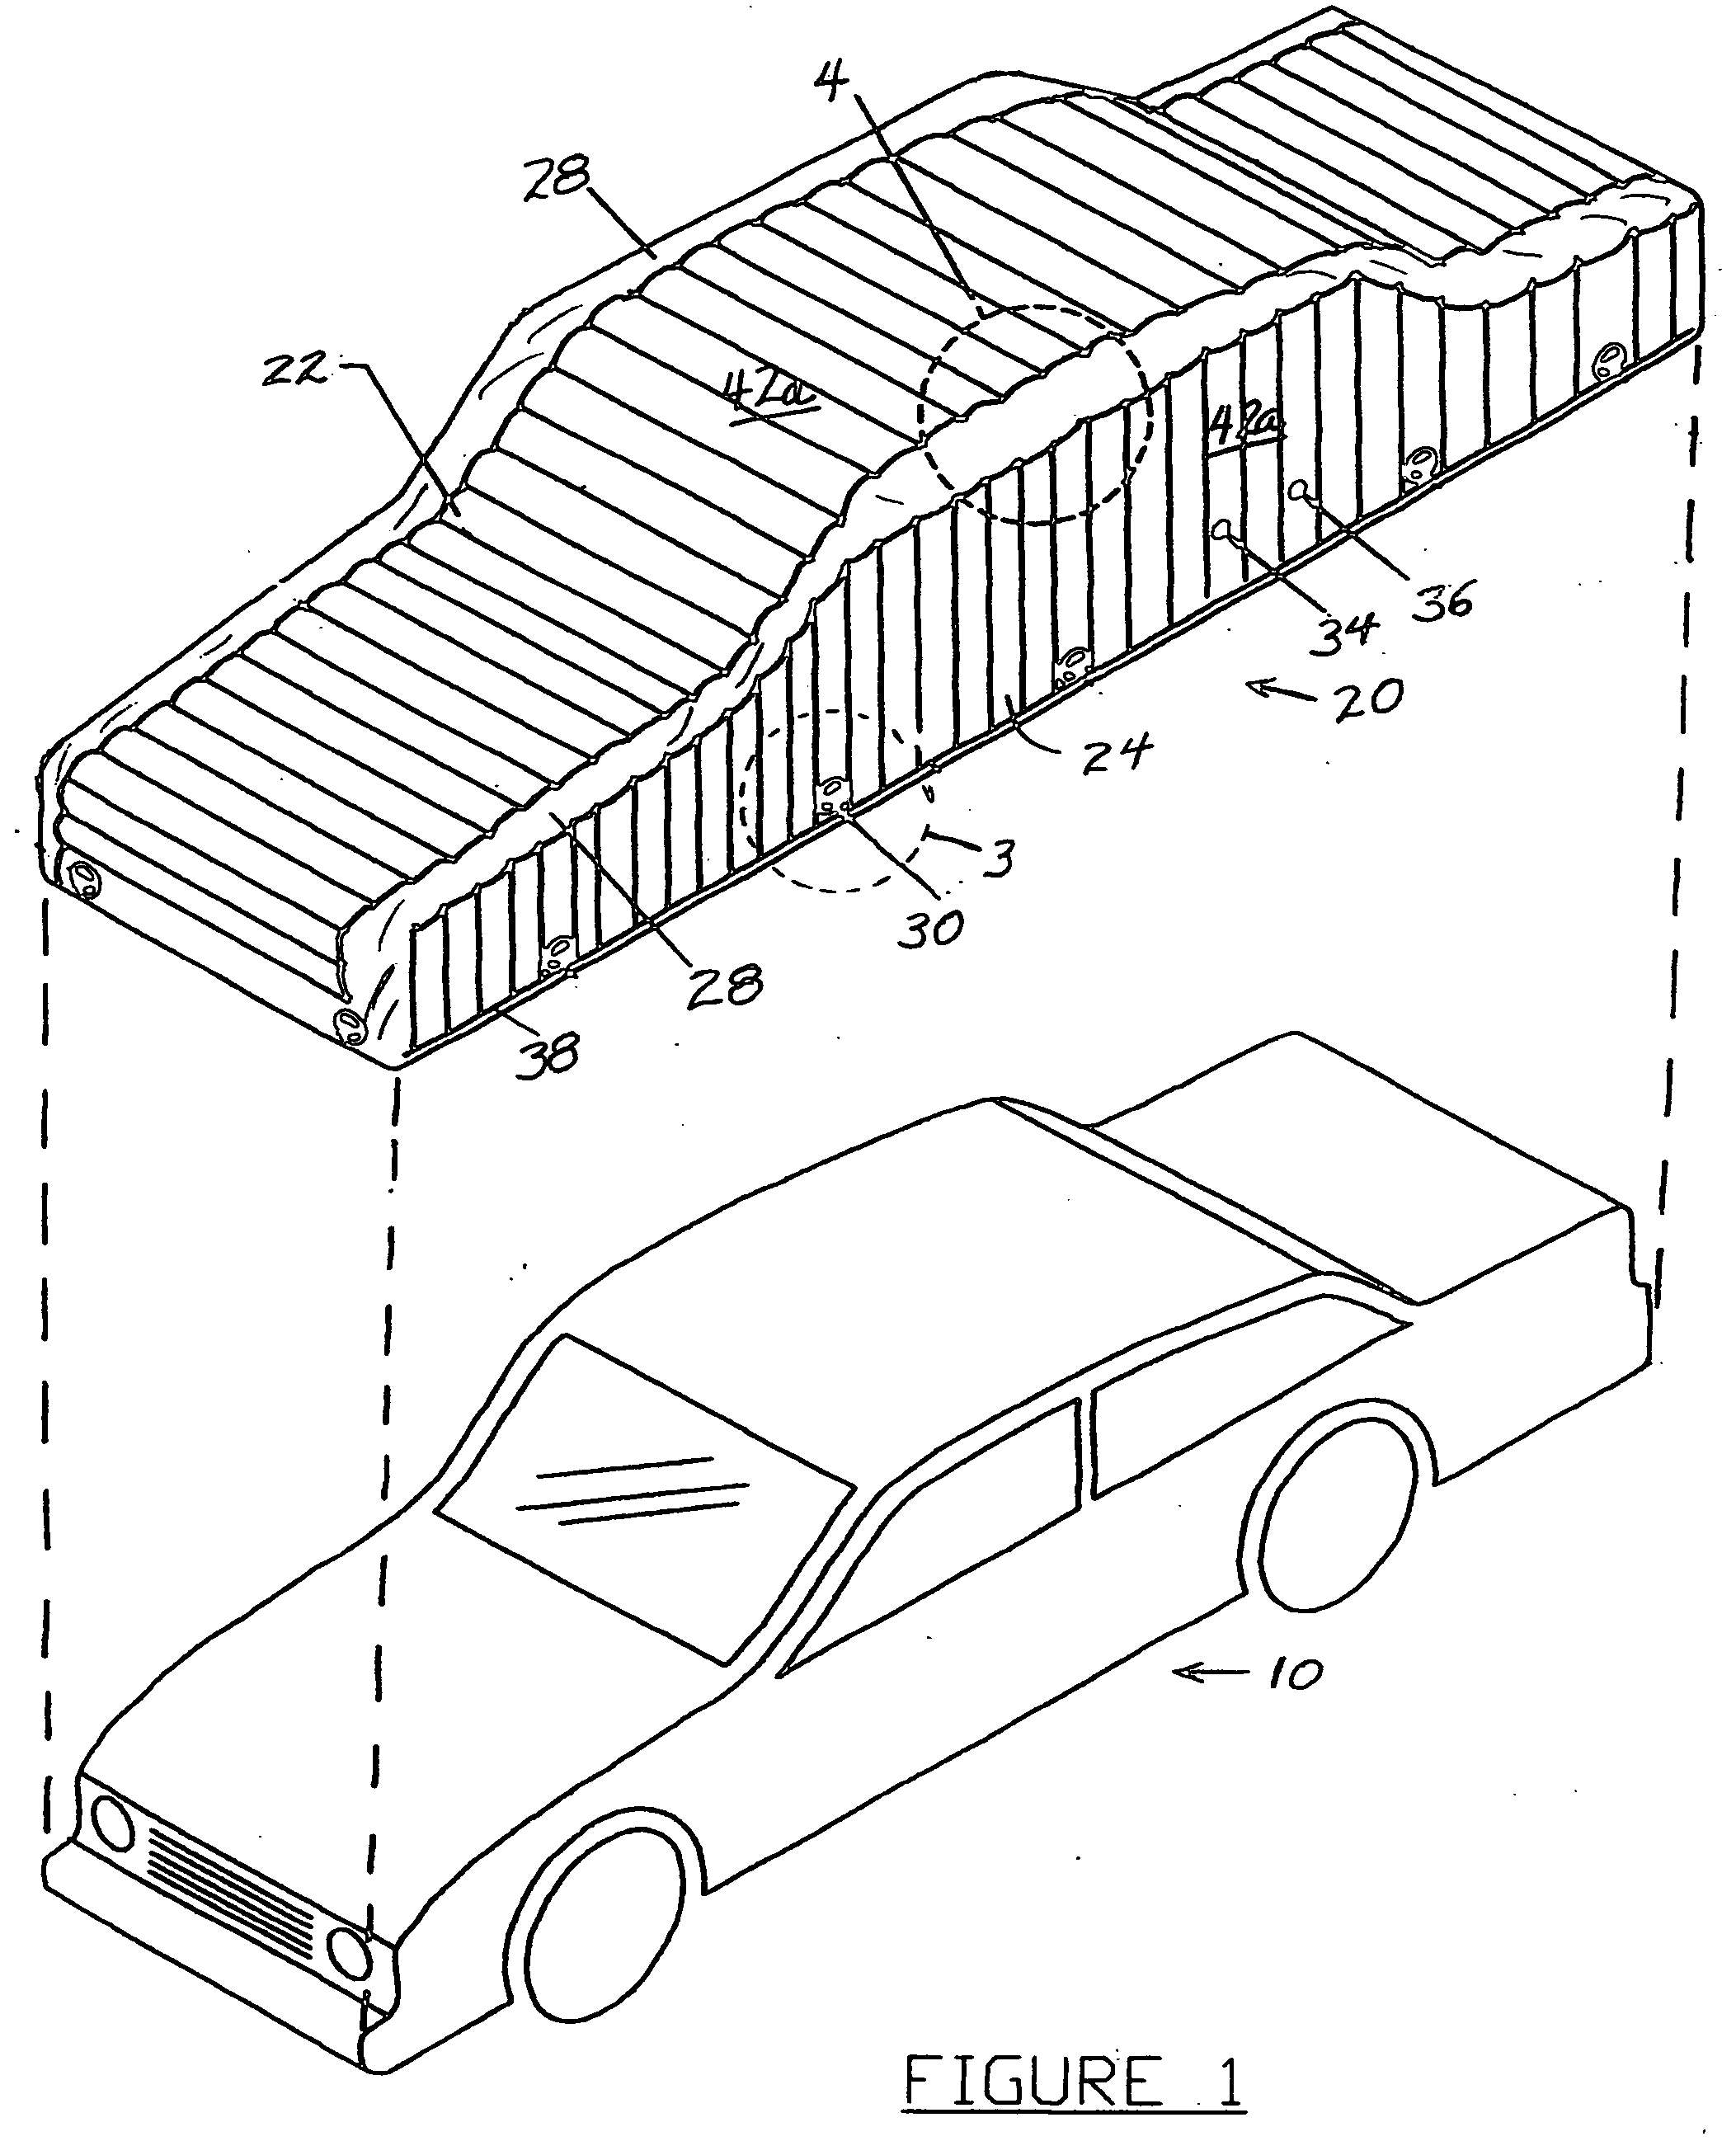 Protective vehicle cover and method of use